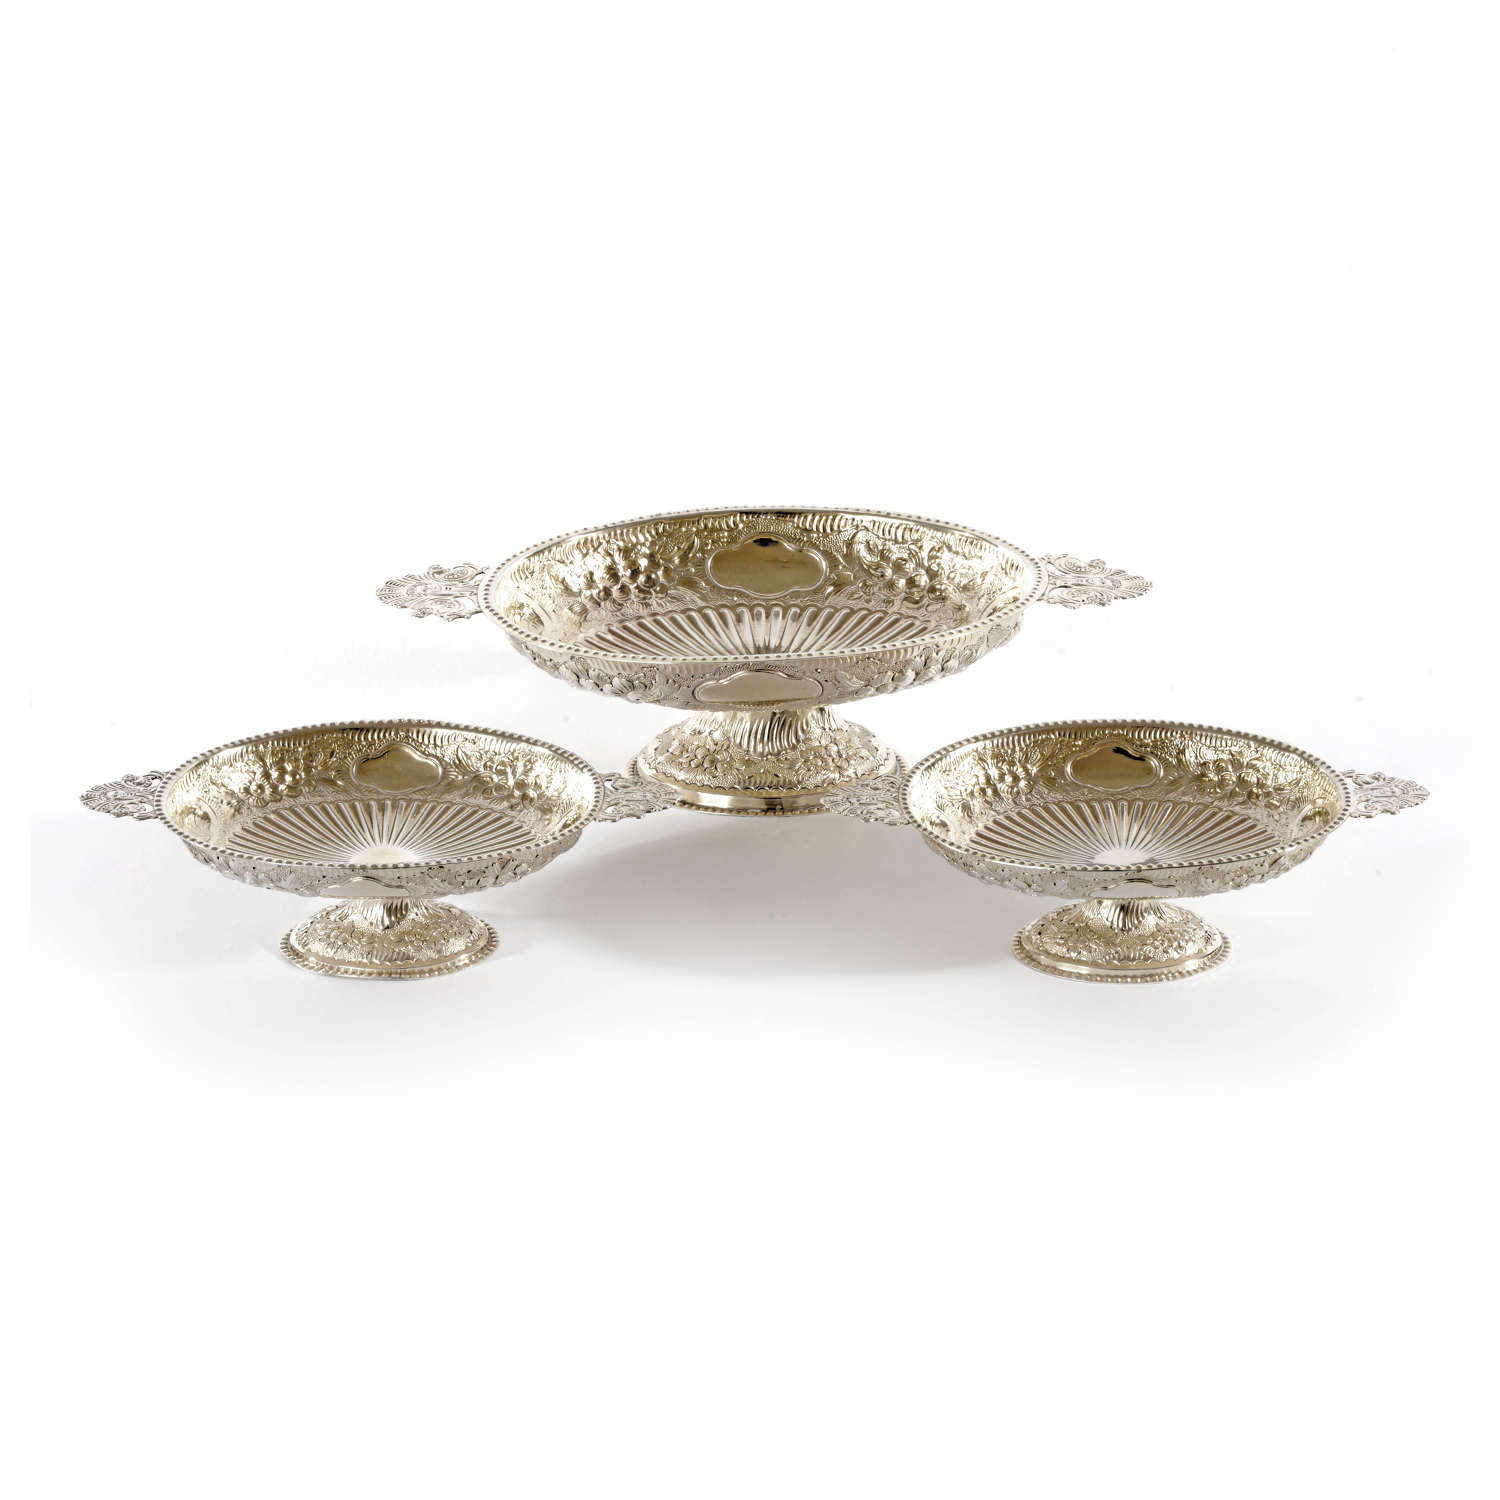 A set of three Victorian silver oval Tazze/comports.